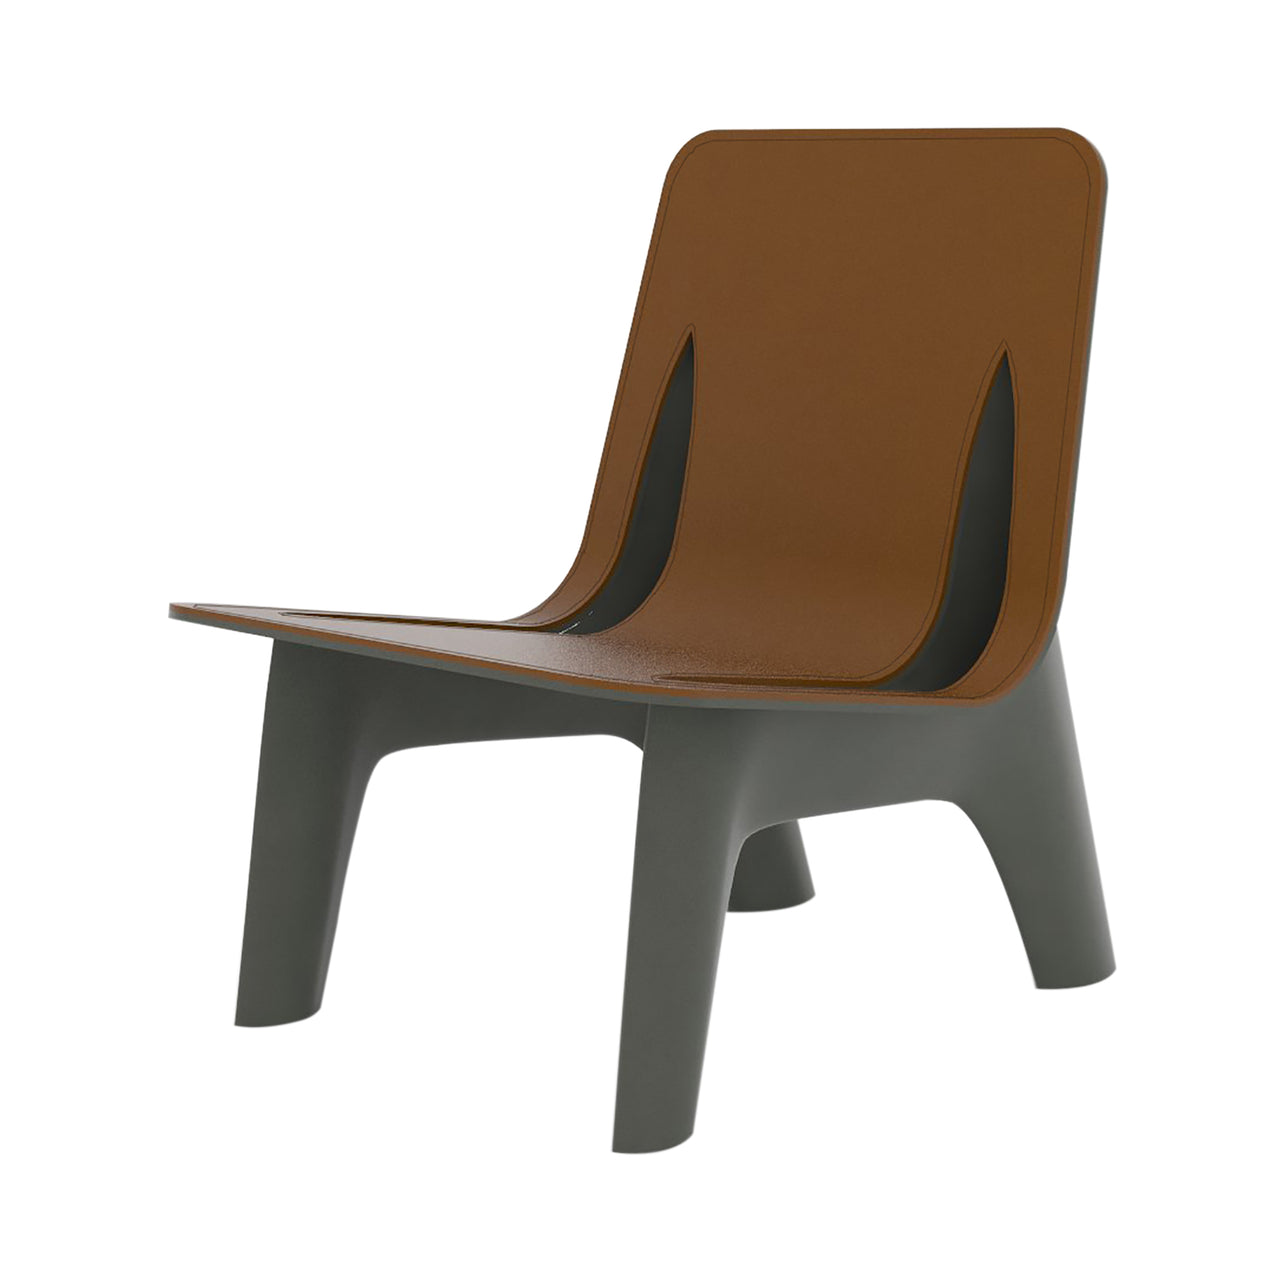 J-Chair Lounge: Leather Seat + Aluminum + Umbra Grey + Brown